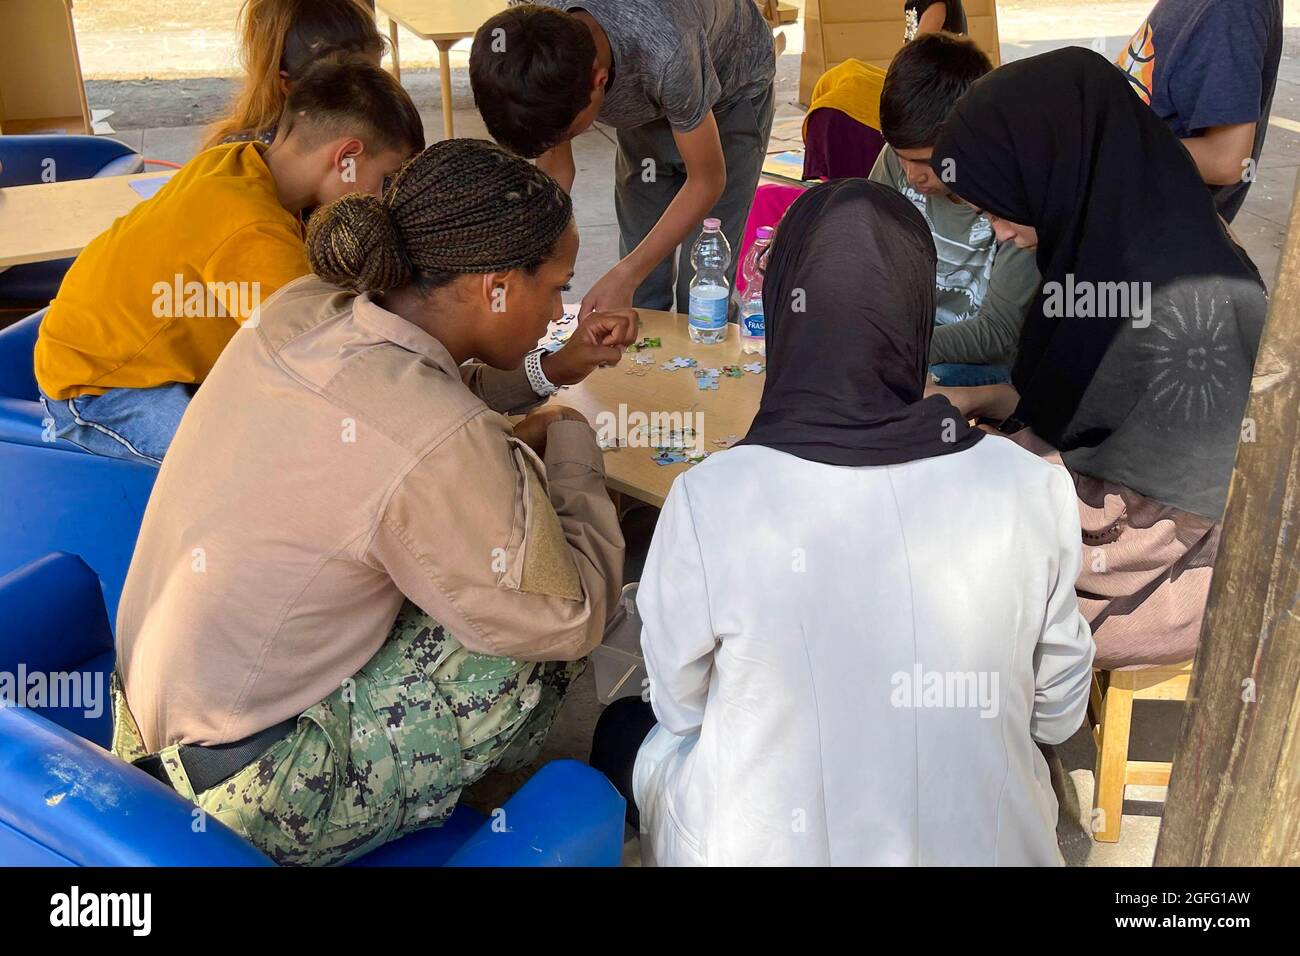 A United States Navy Sailor and Afghan children evacuees put together puzzles at Naval Air Station Sigonella, August 24, 2021. NAS Sigonella is supporting Department of Defense mission “Operation Allies Refuge” to facilitate the safe departure and relocation of U.S. citizens, Special Immigration Visa recipients, and vulnerable Afghan populations from Afghanistan.Mandatory Credit: Kevin Pickard, Jr./US Navy via CNP /MediaPunch Stock Photo